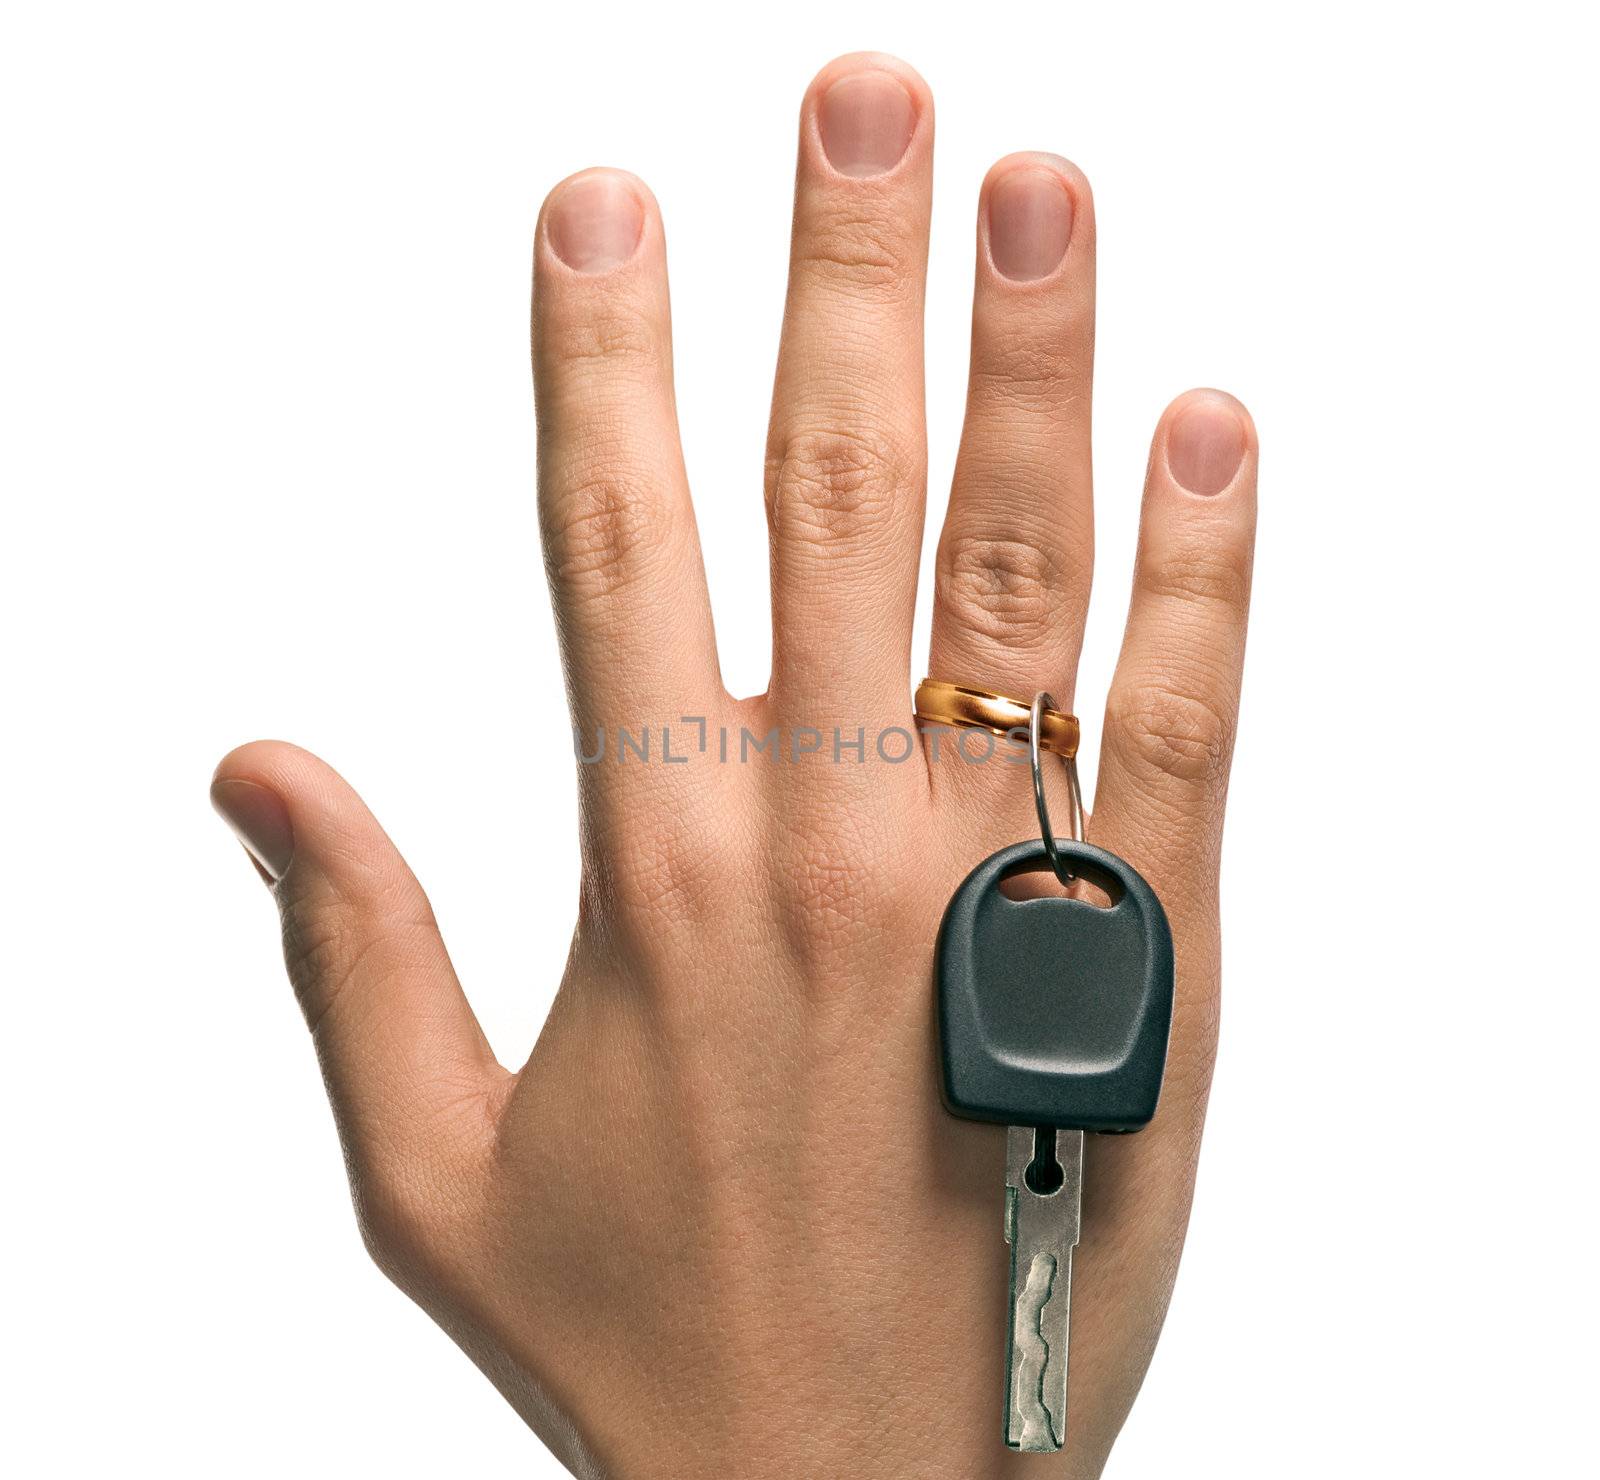 A concept image of a mans hand holding a key and a wedding ring